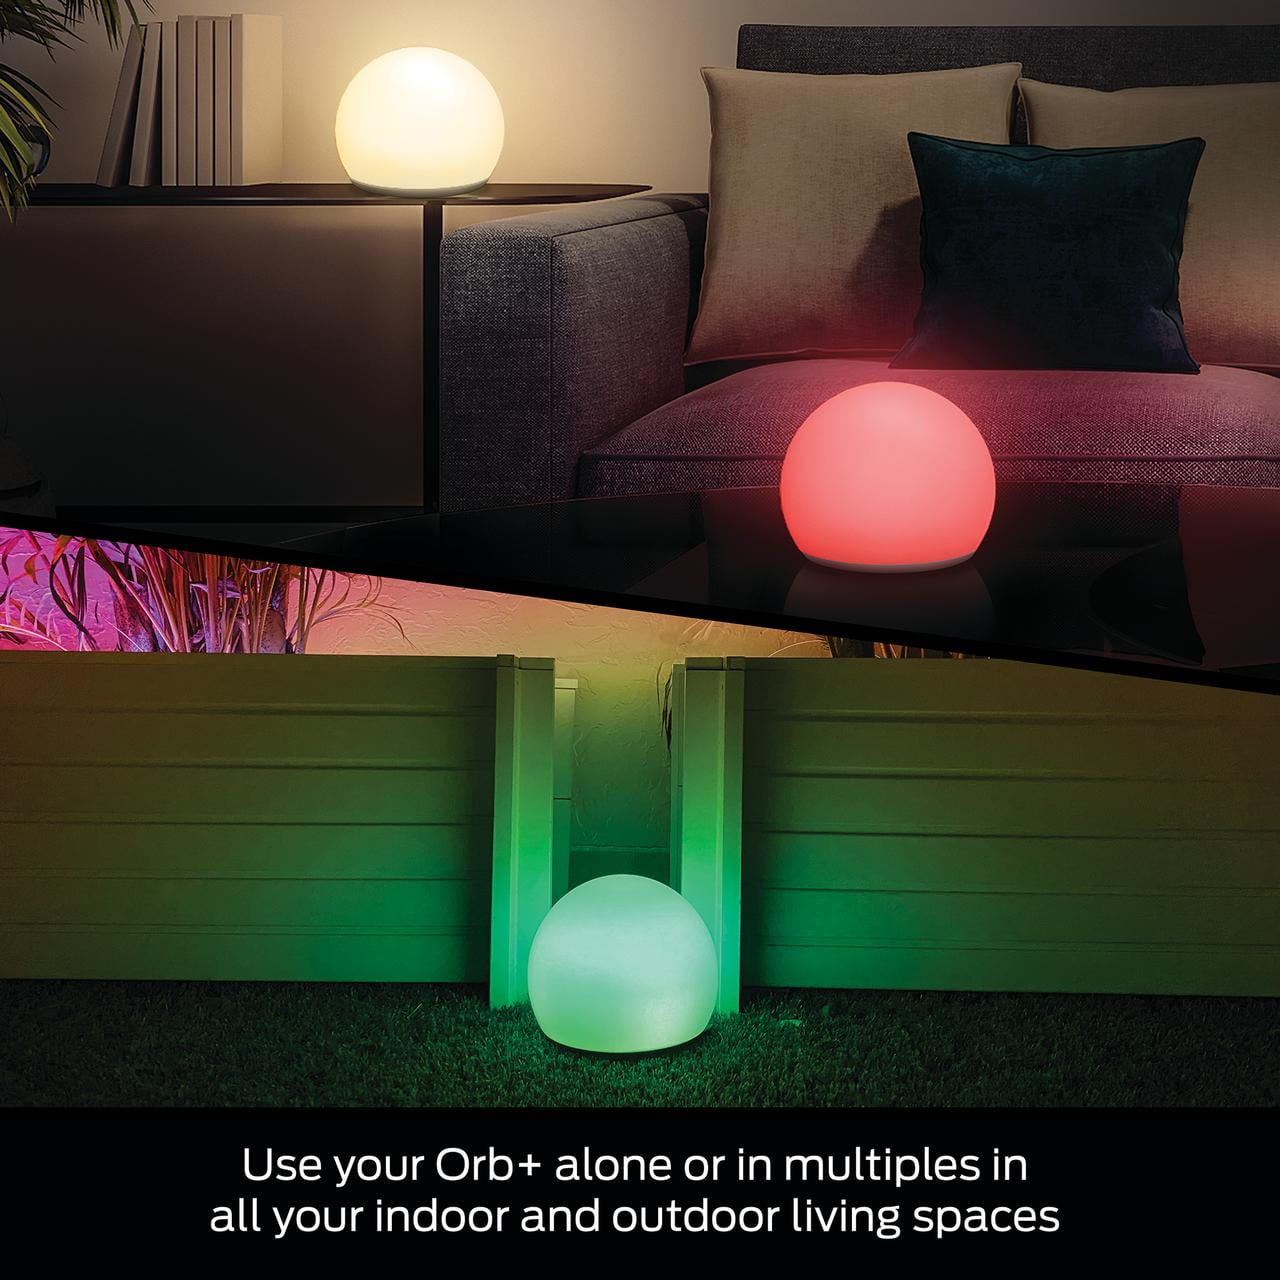 Monster Smart Orb And Portable Led Light Ball Indoor Outdoor : Target